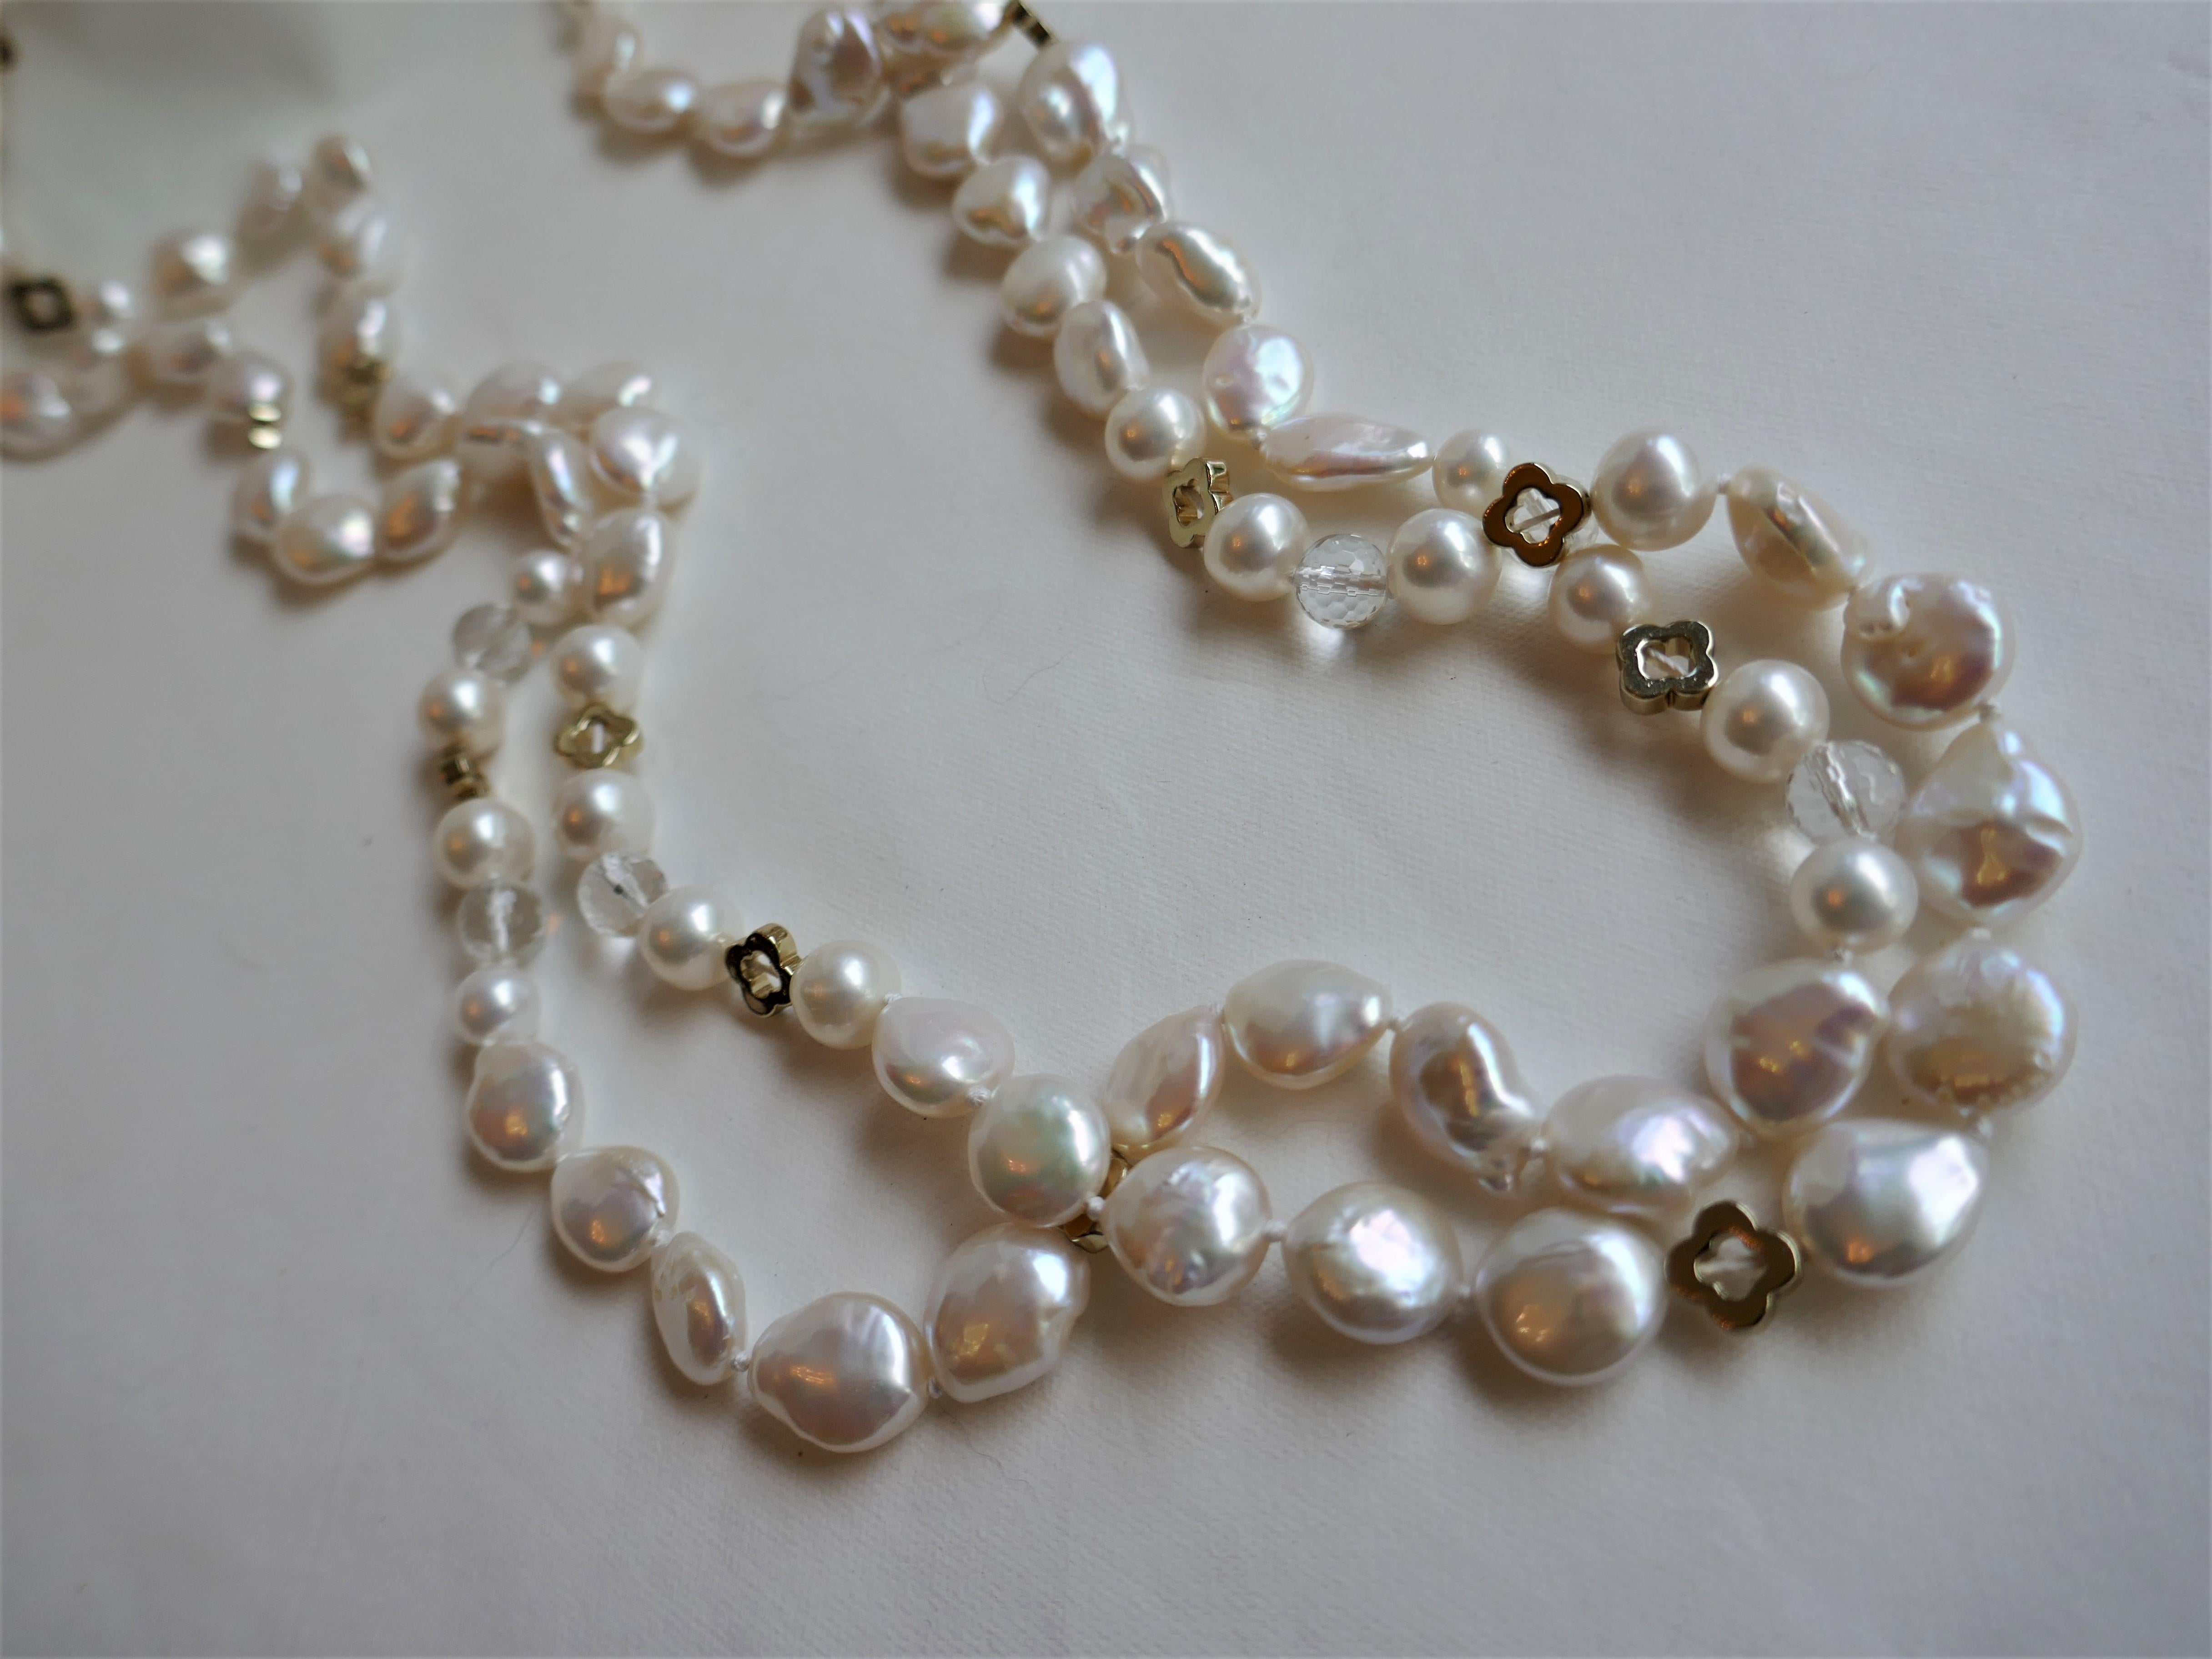 These necklace are beautiful. Excellent pearl quality. I combined white coin cultured pearls 11-12mm with almost round white cultured pearls 8.5-9mm and interspersed the stands with faceted rock crystal 8mm and gold plated hematite trebol.  The